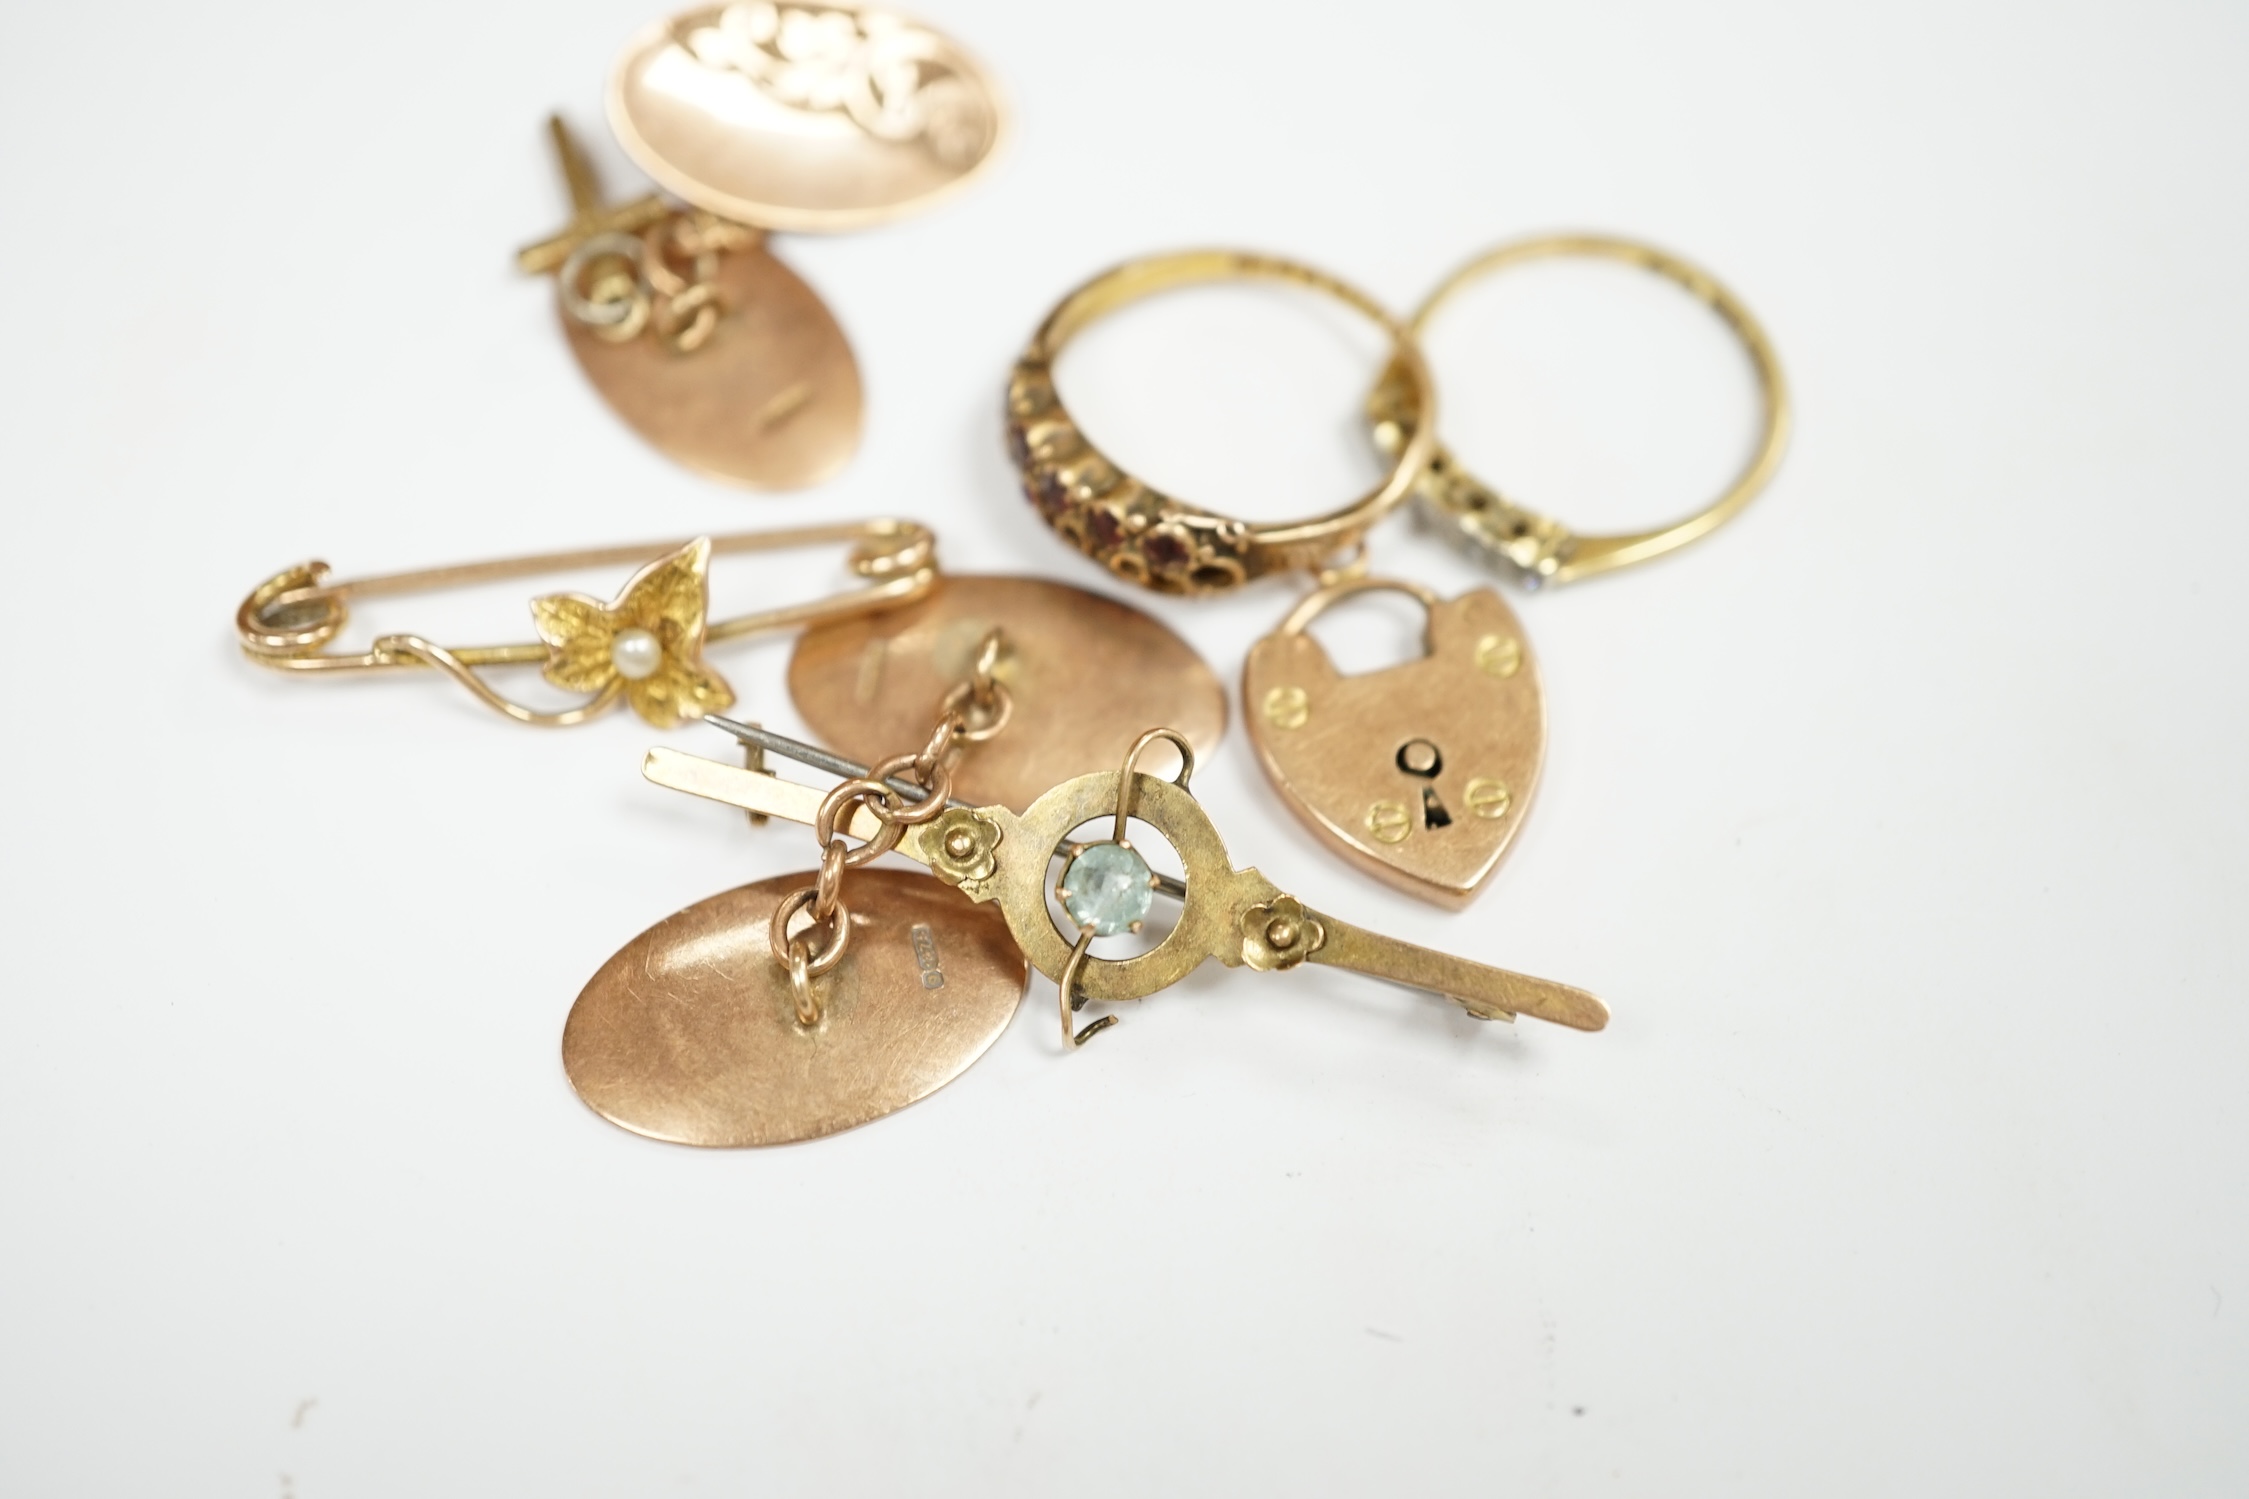 A pair of engraved 9ct gold oval cufflinks, two yellow metal bar brooches including 9ct, a 15ct gold and gem set ring (lacking stones), an 18ct and five stone diamond chip set ring and two 9ct charms. Condition - poor to